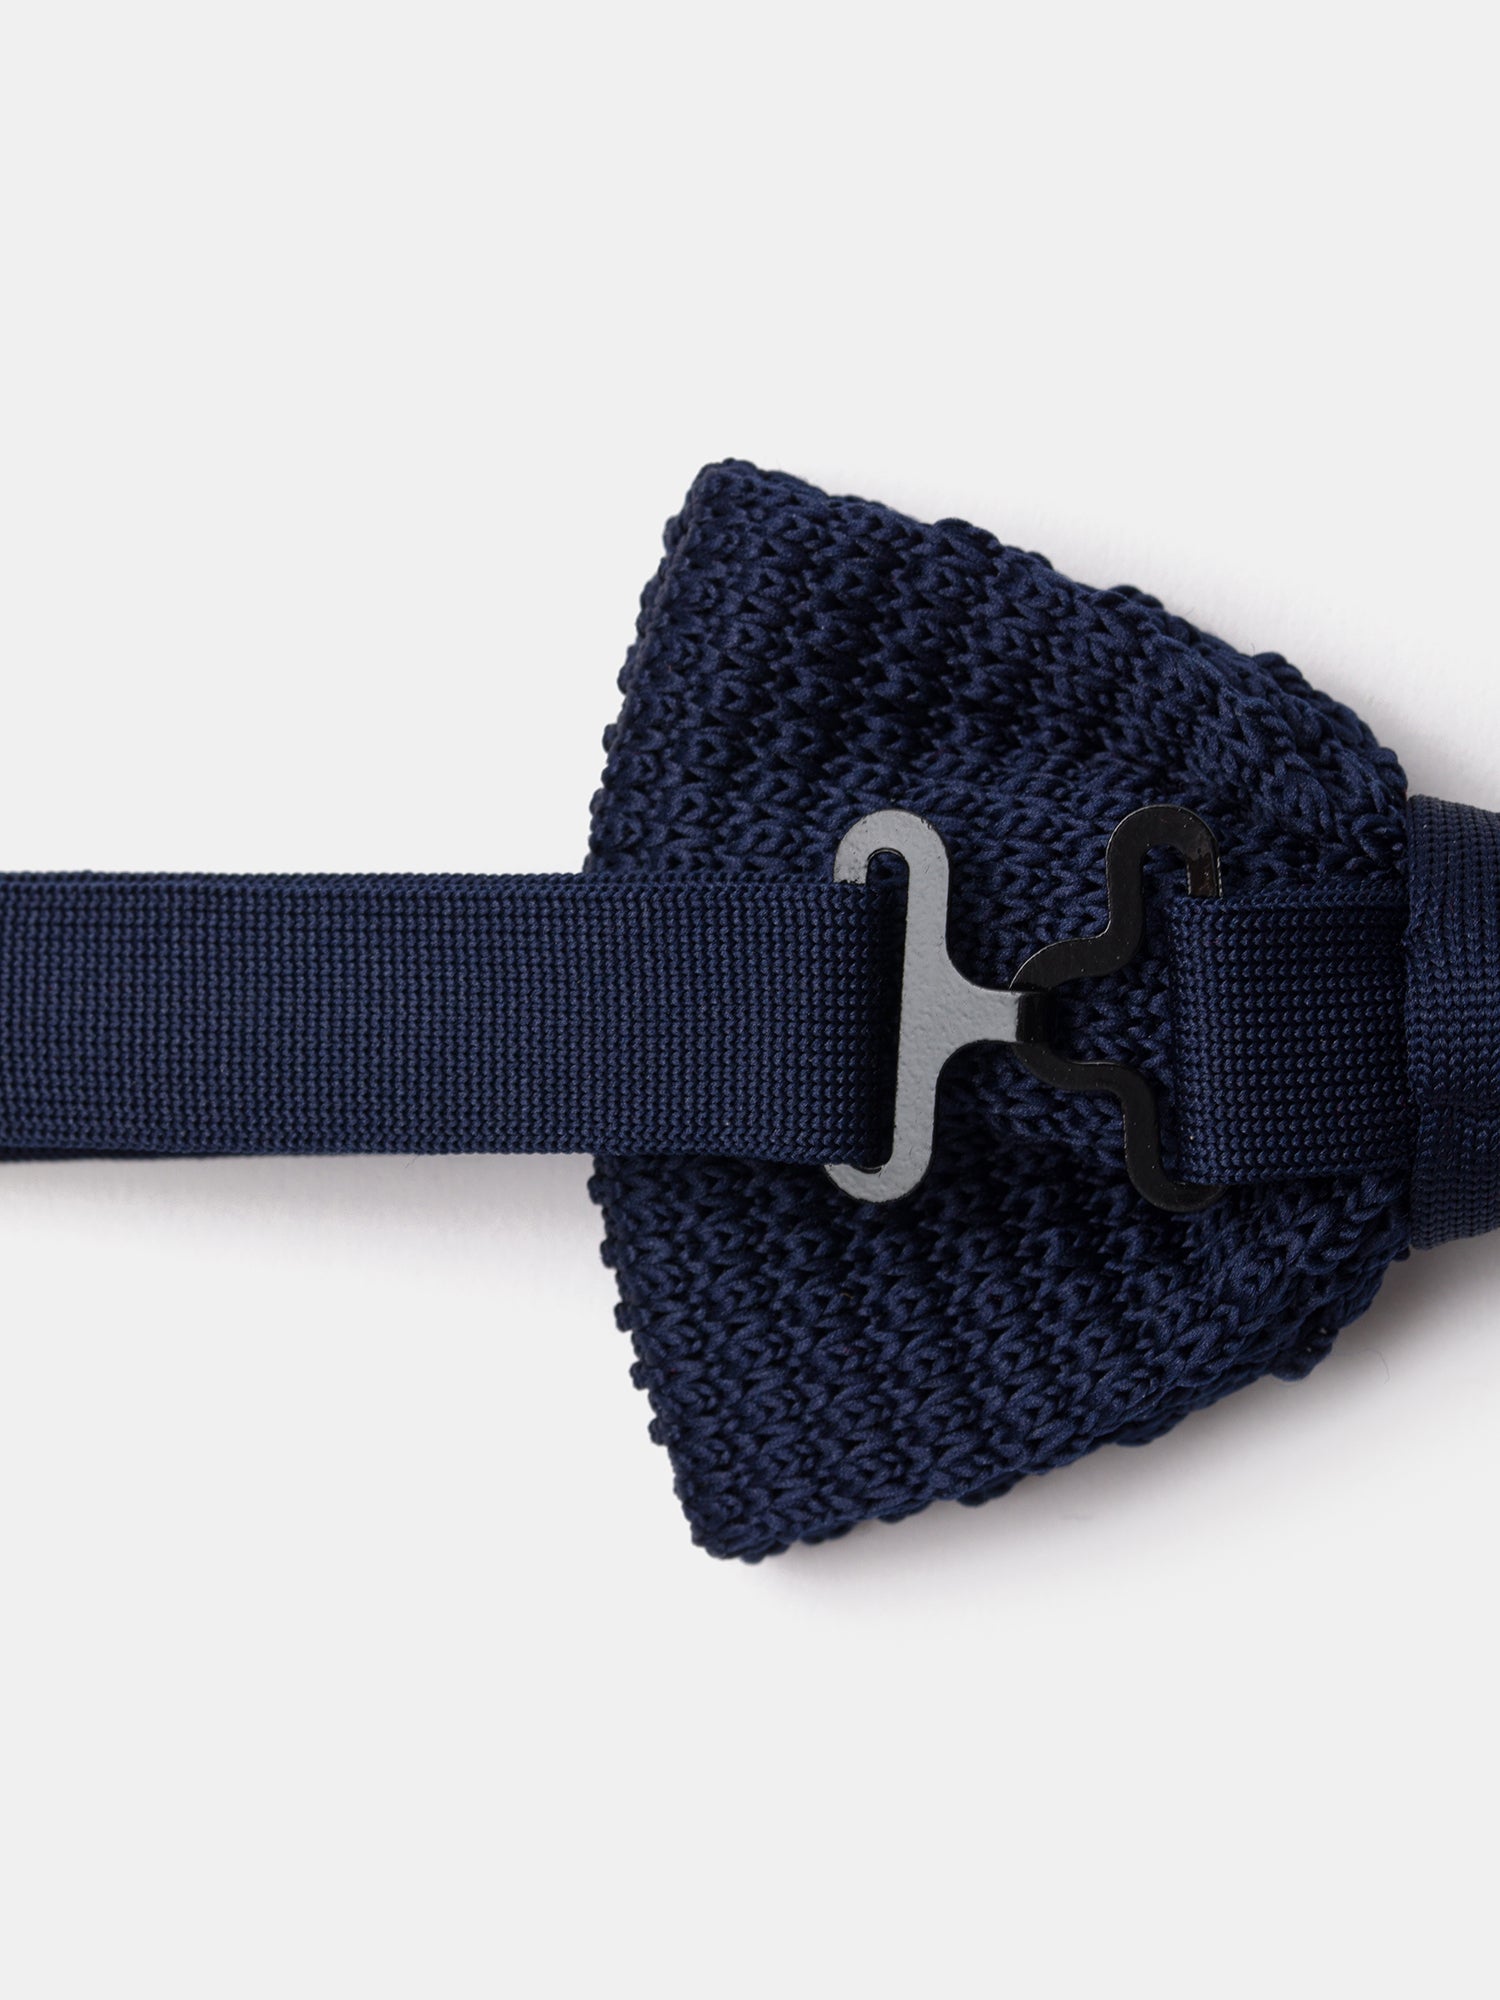 Navy Knitted Bow Tie